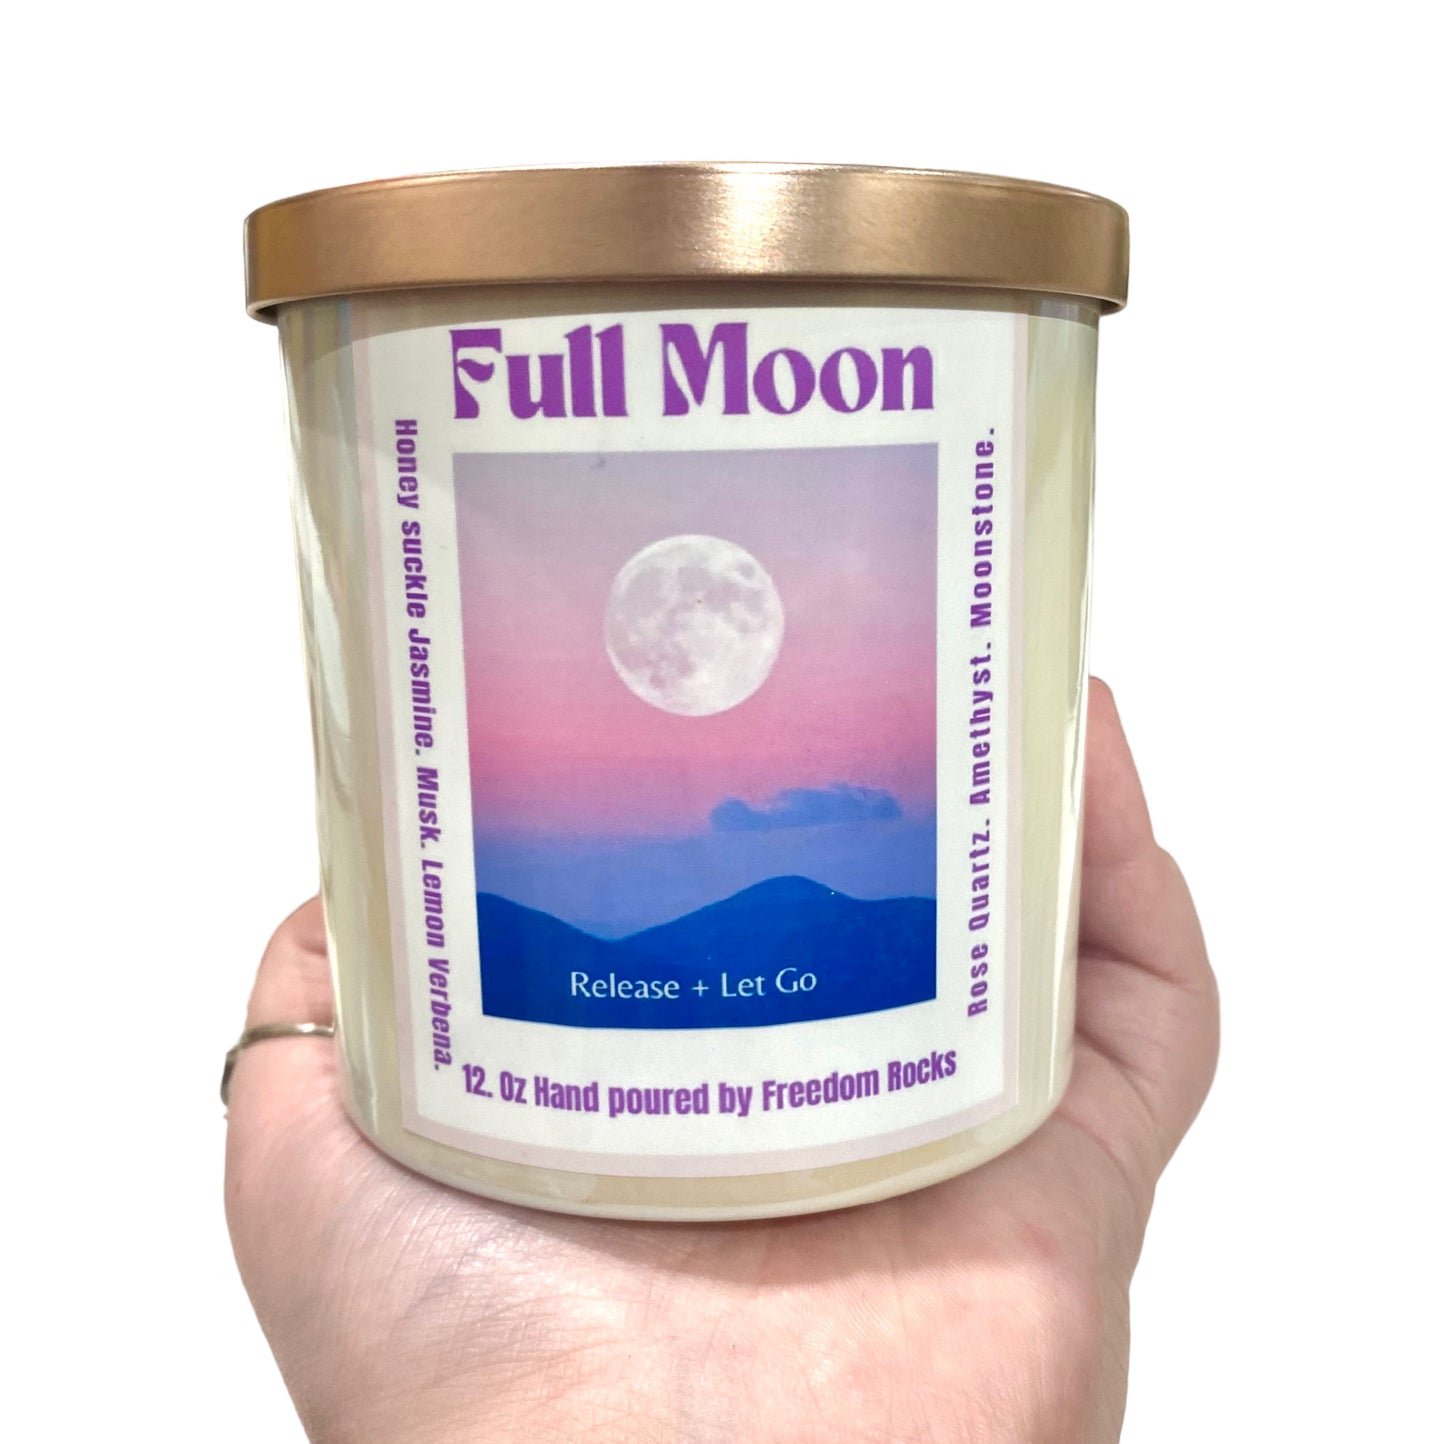 Full Moon 10 oz Hand Poured Soy Candle